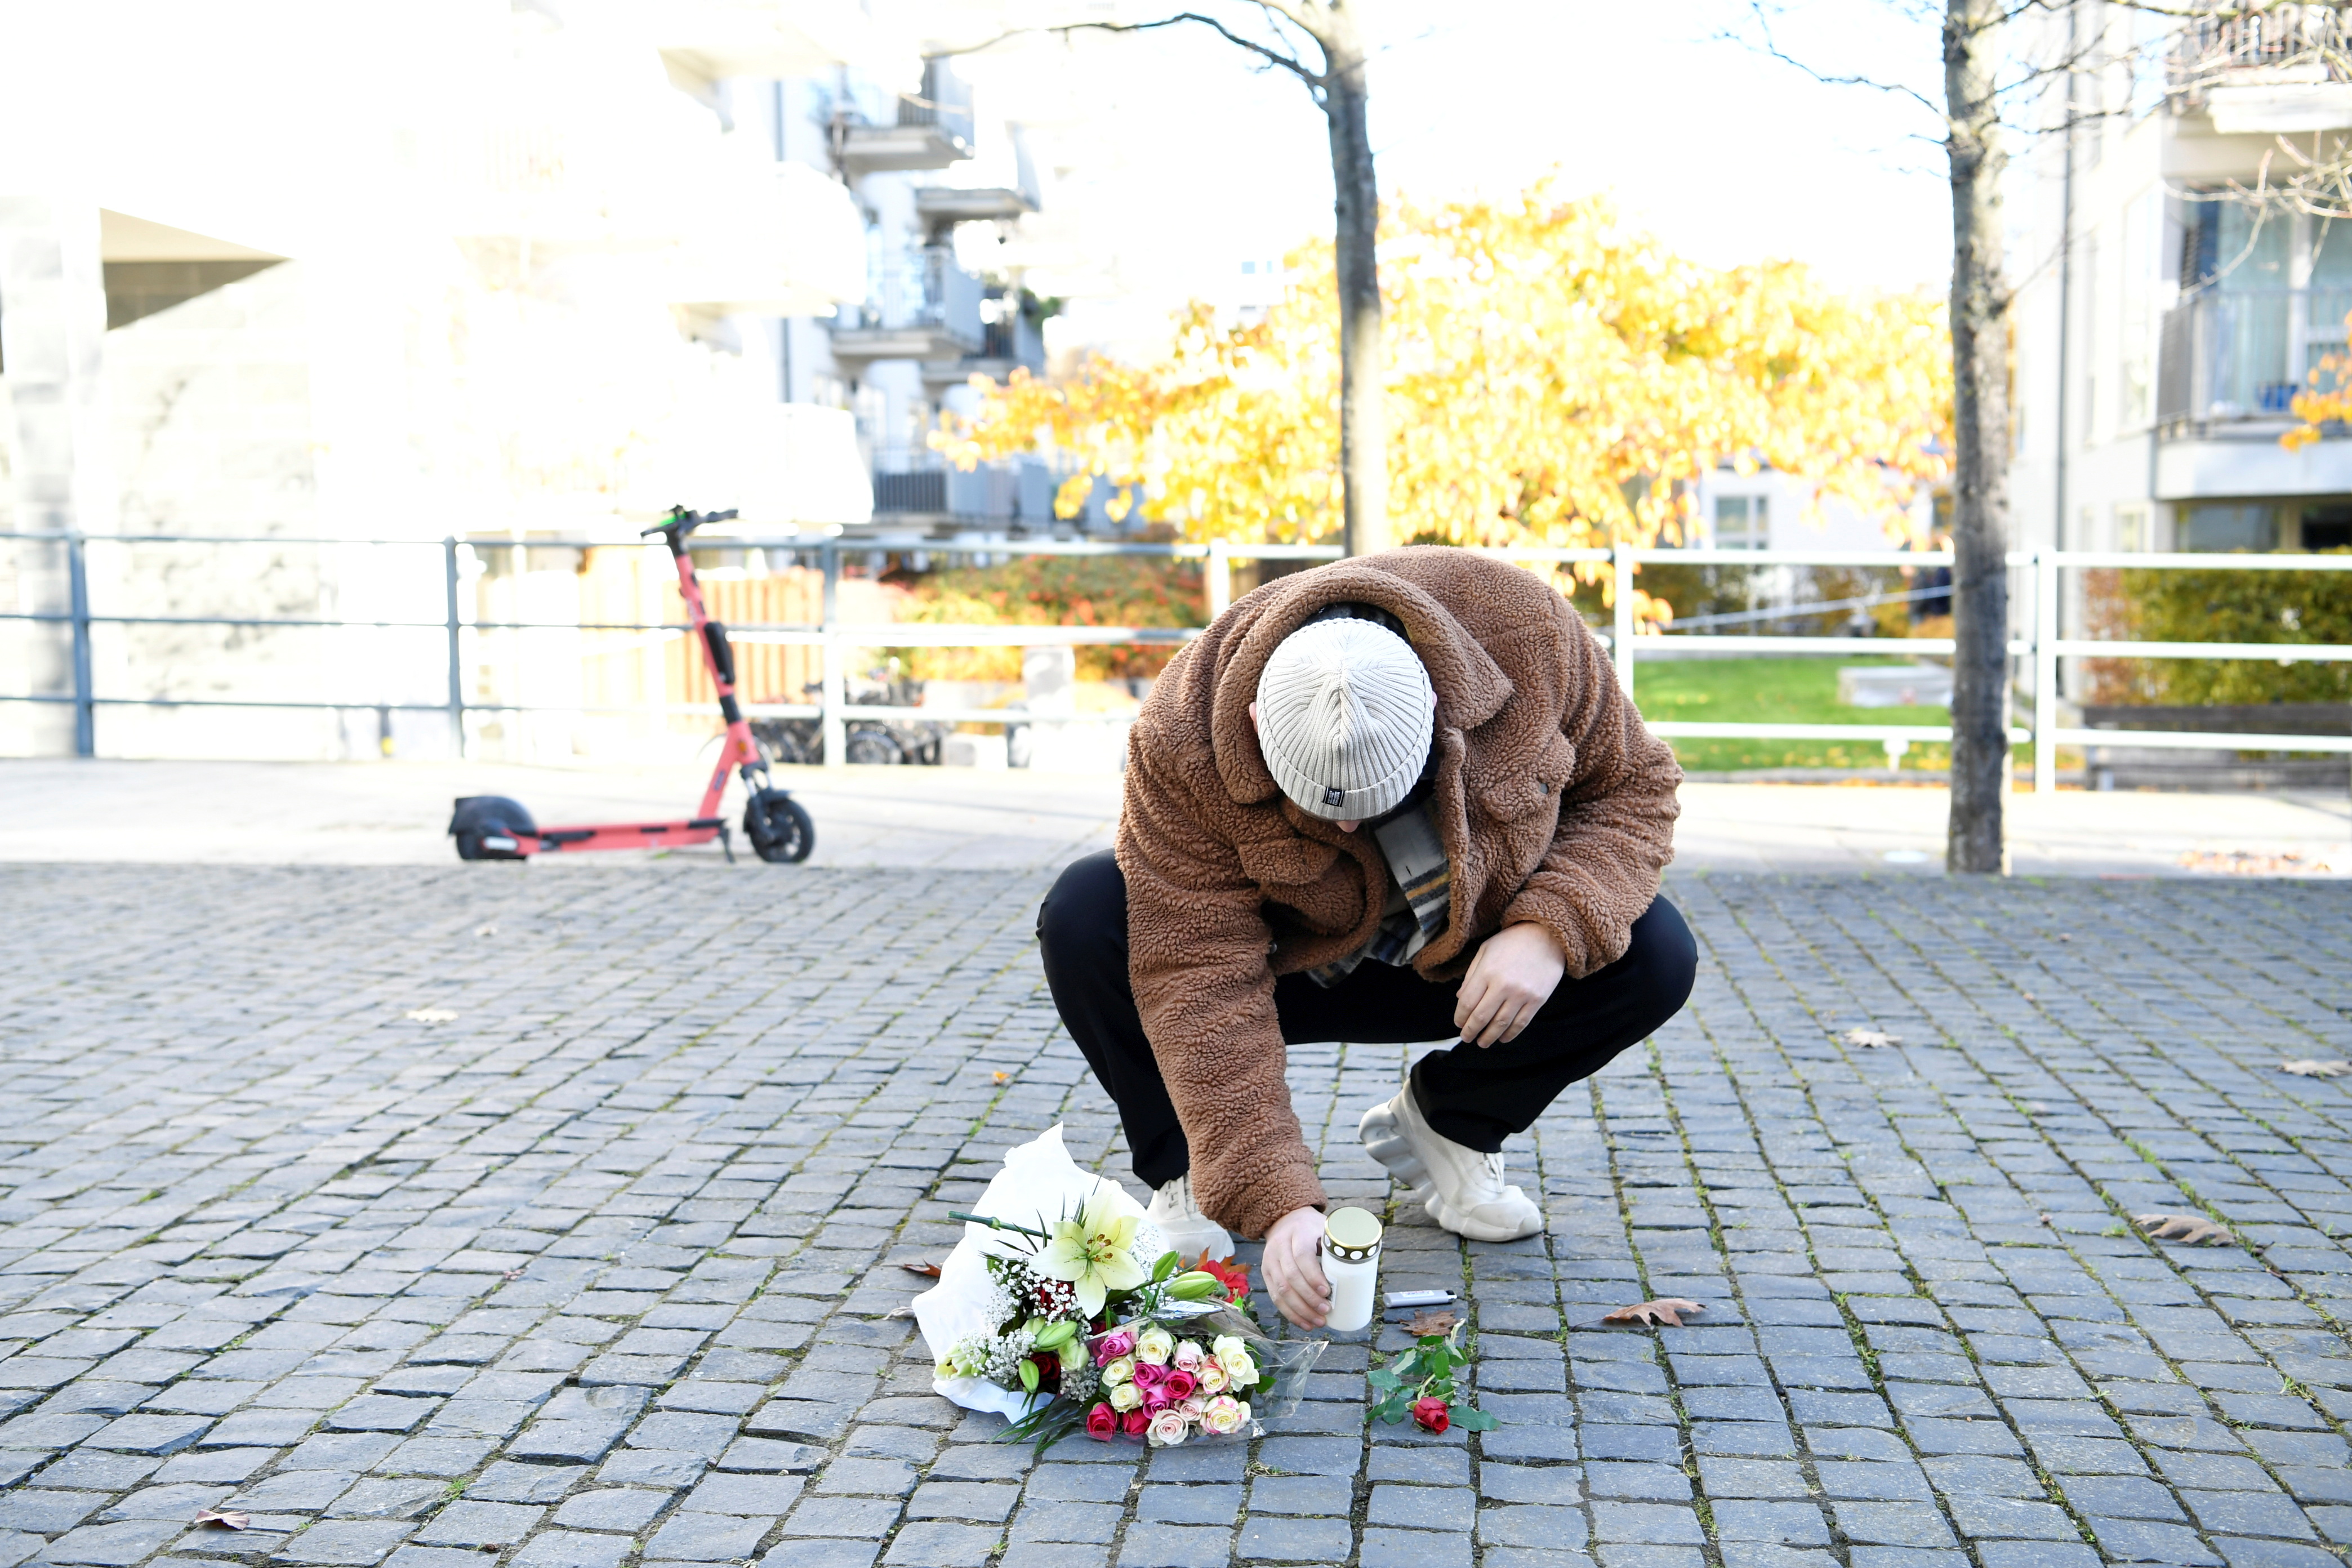 A man places flowers and a candle at the site, where Swedish rapper Einar was reportedly shot dead in the street on Thursday night, in the Hammarby Sjostad distict in Stockholm